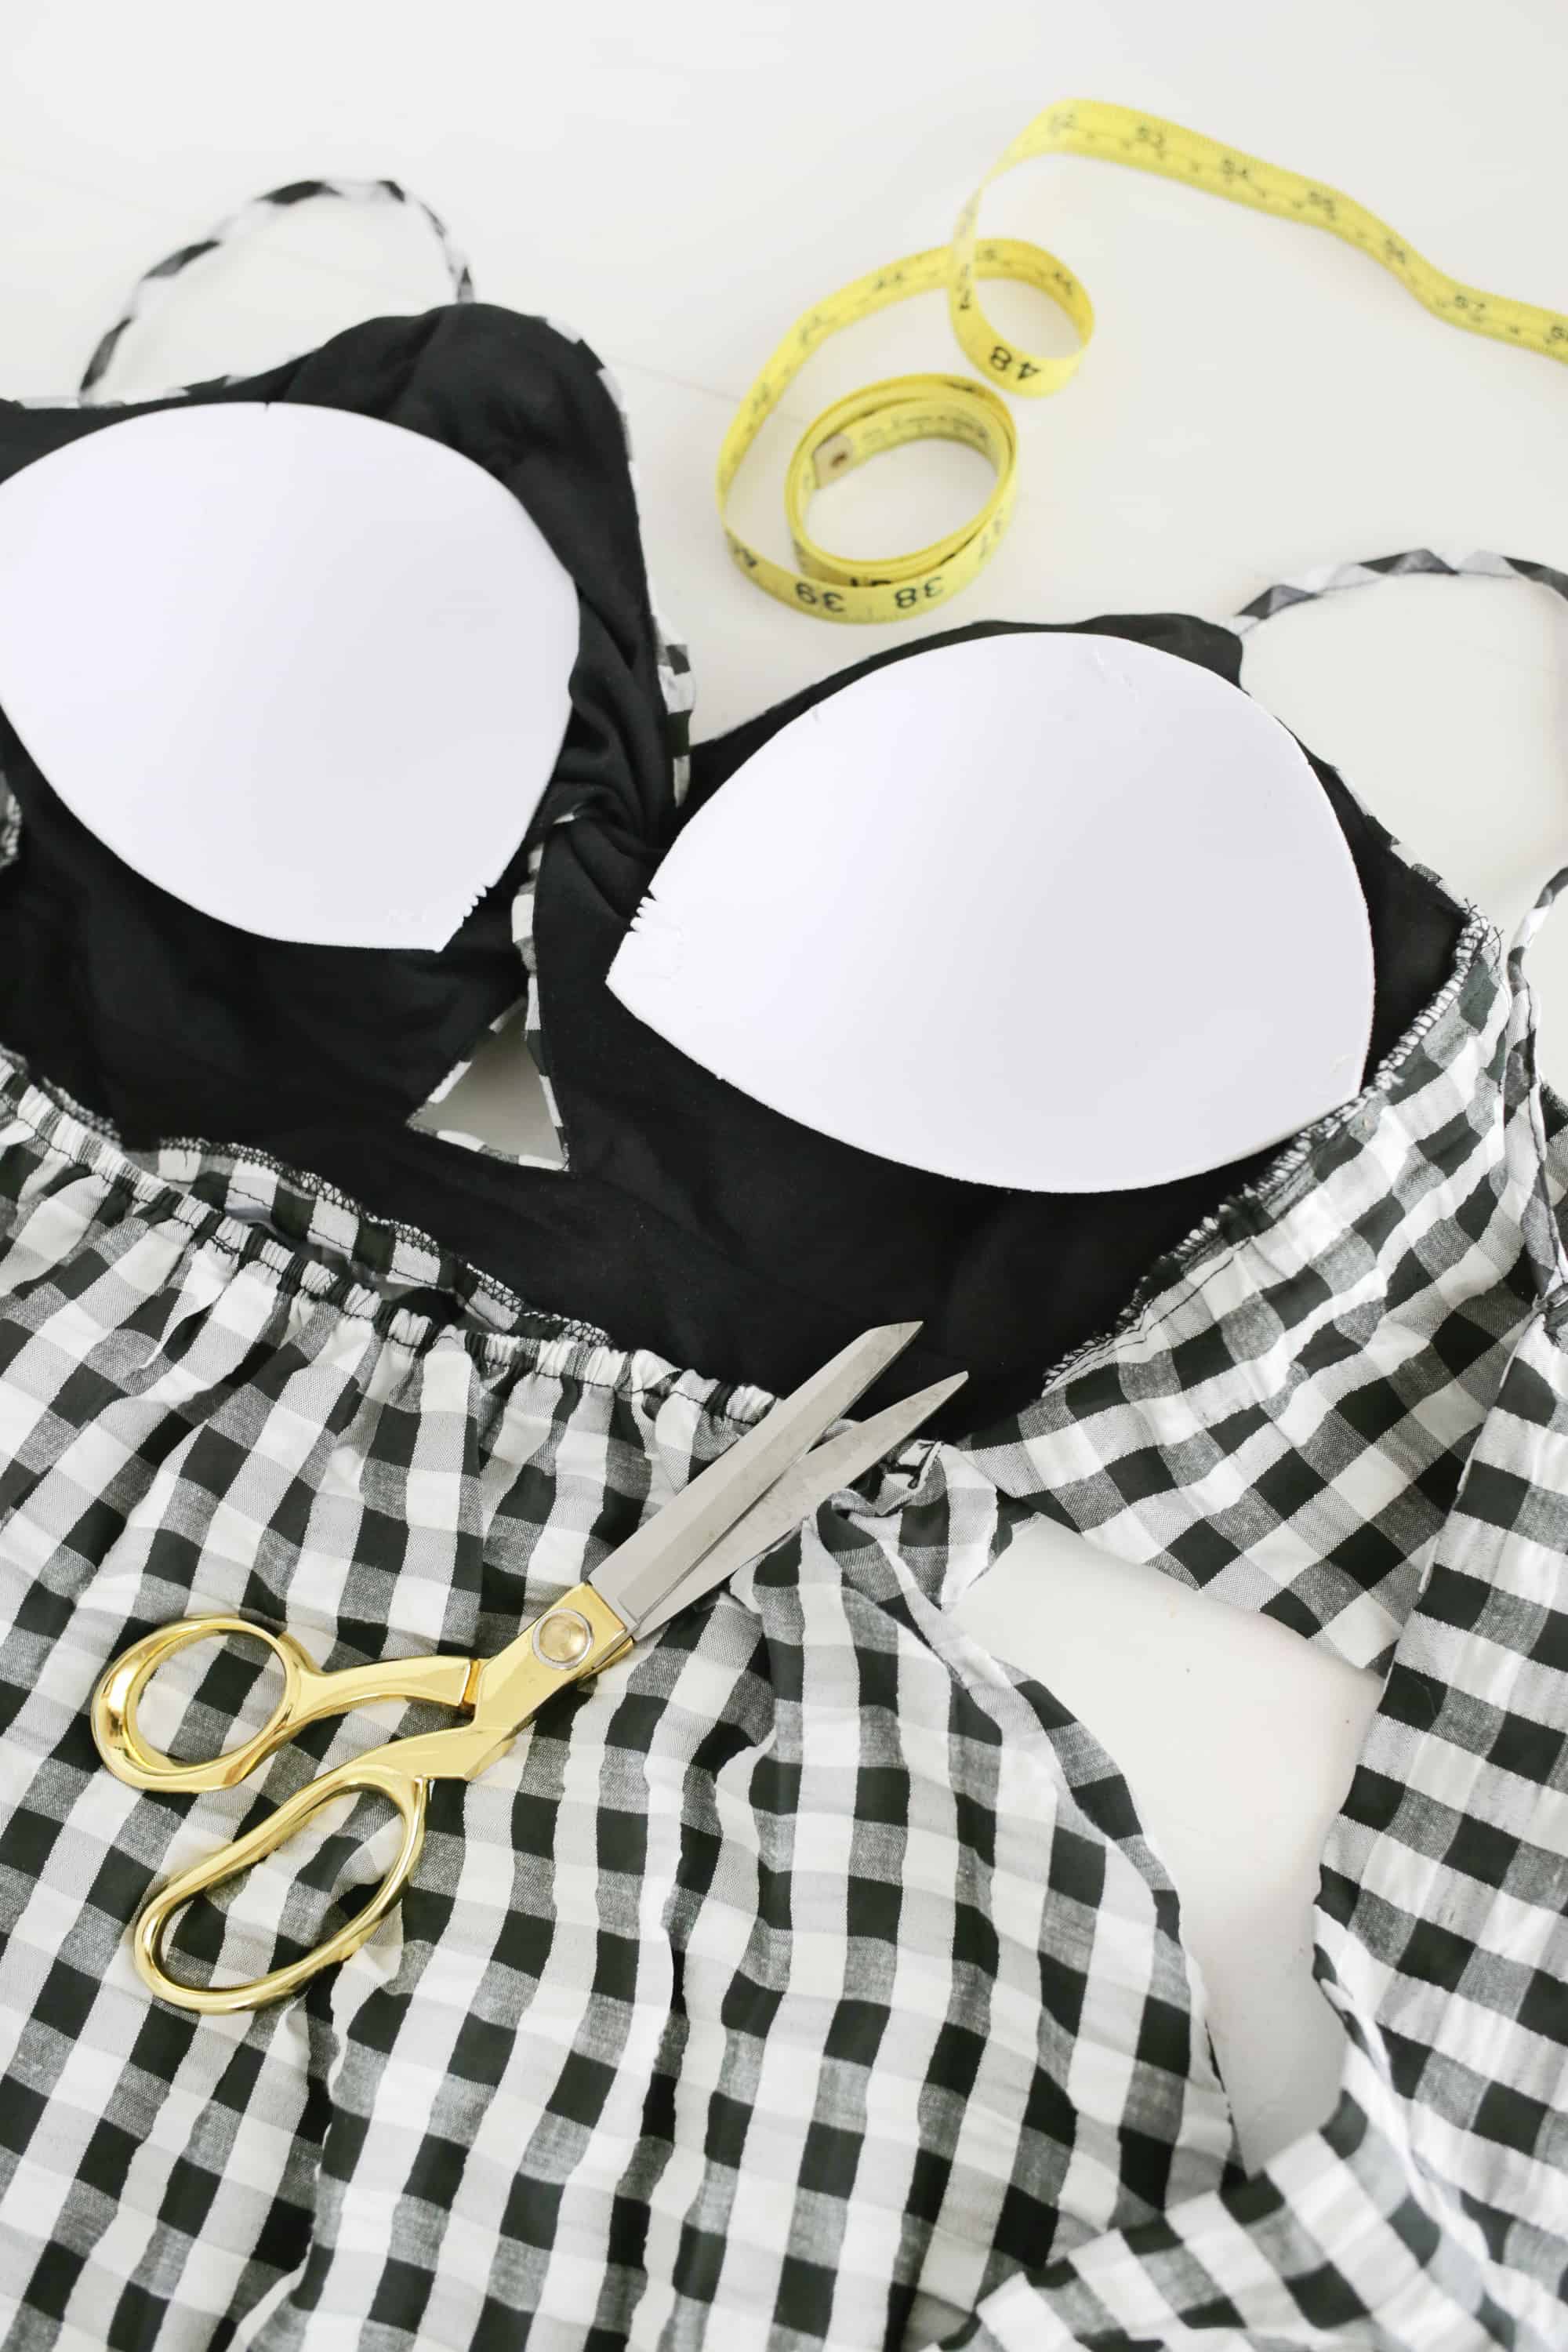 bra cups sewn into black and white checkered dress with gold scissors laying on top of it